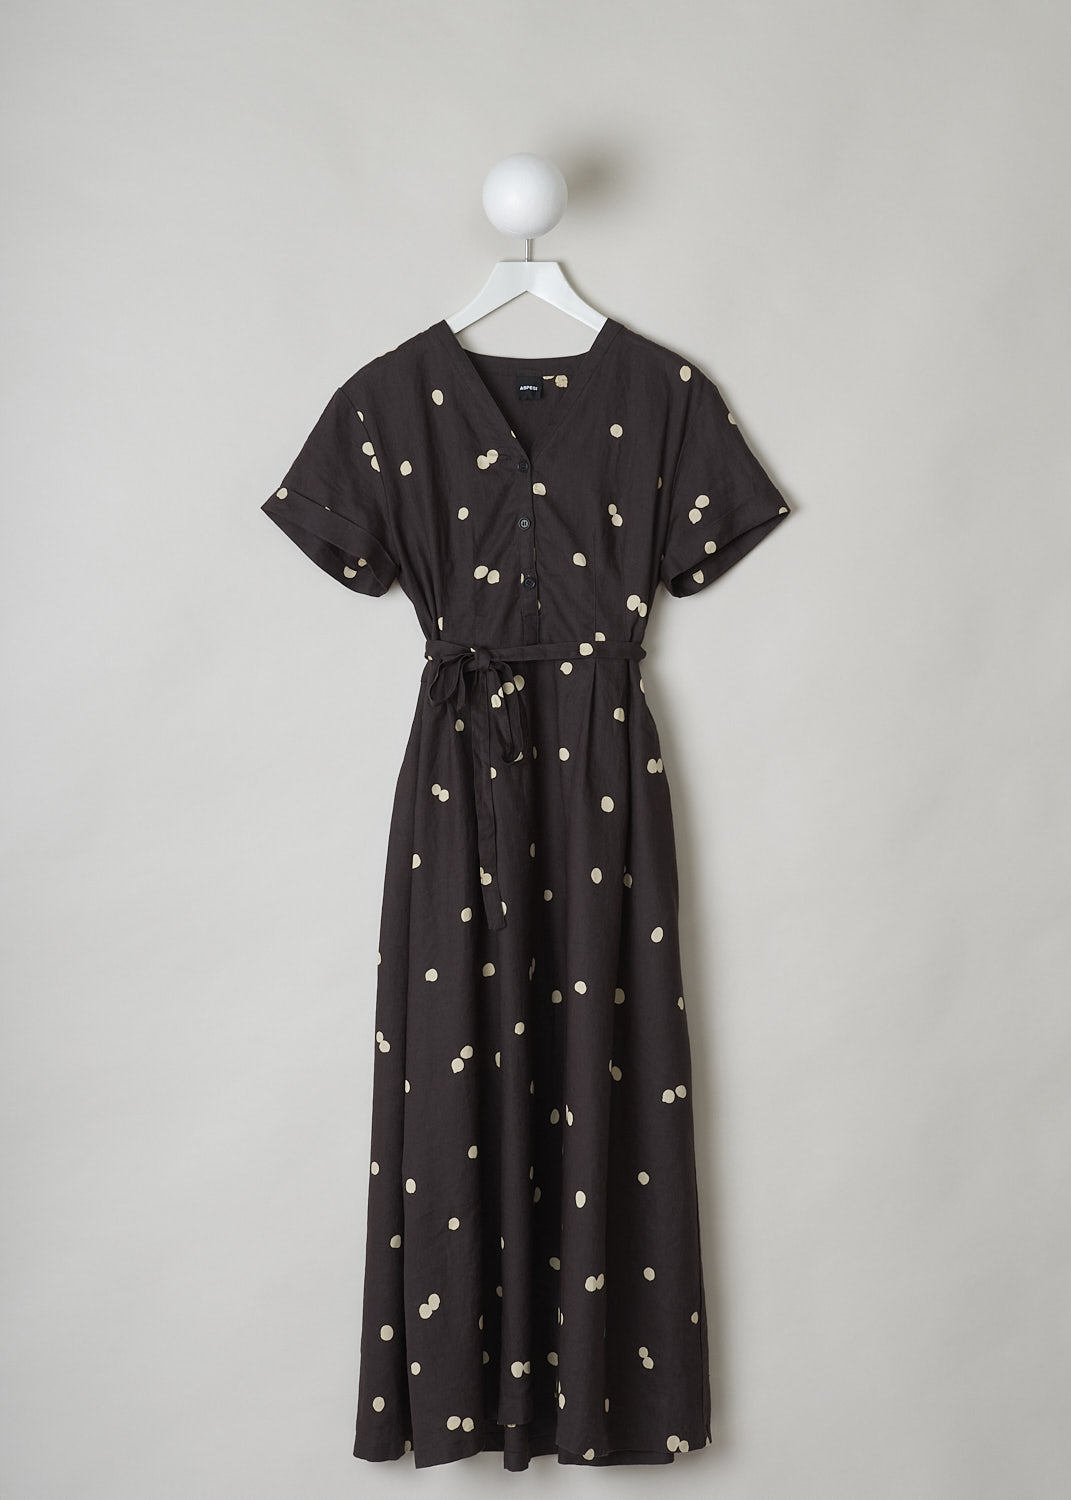 ASPESI, BROWN LINEN MAXI DRESS WITH DOTTED PRINT, 2958_M277_62331, Brown, Print, Front, This chocolate brown linen dress has a off-white dotted print throughout. The dress has a modest V-neckline and w three-button closure in the front. The dress has short sleeves with rolled cuffs. An attached belt can be used to cinch in the waist. A concealed side zip functions as the closure option. Slanted pockets re concealed in the side seam. The dress has a straight hemline.
